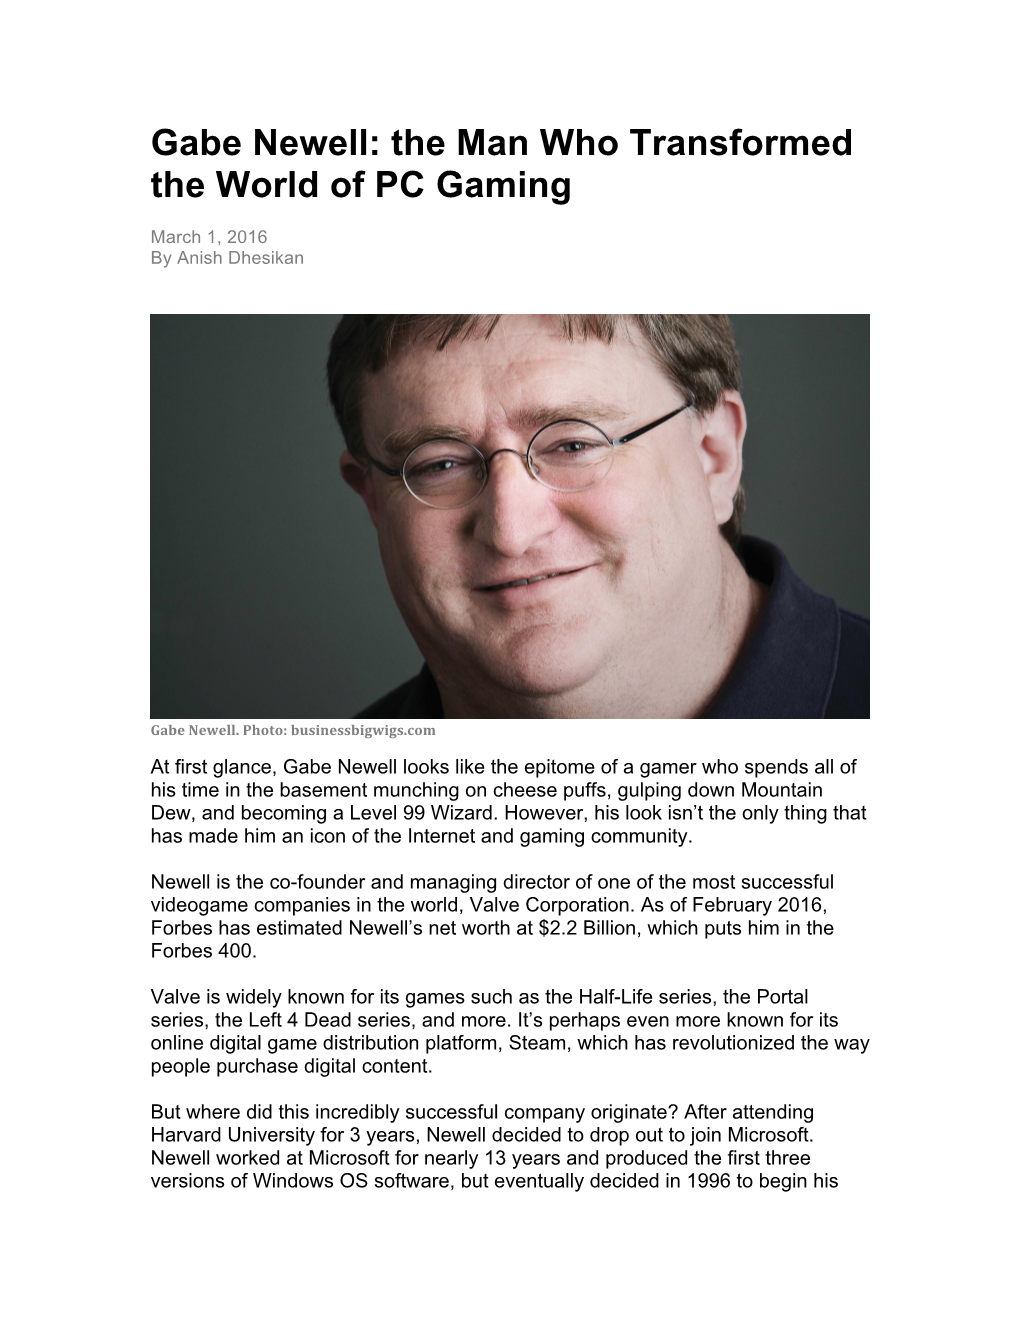 Gabe Newell: the Man Who Transformed the World of PC Gaming